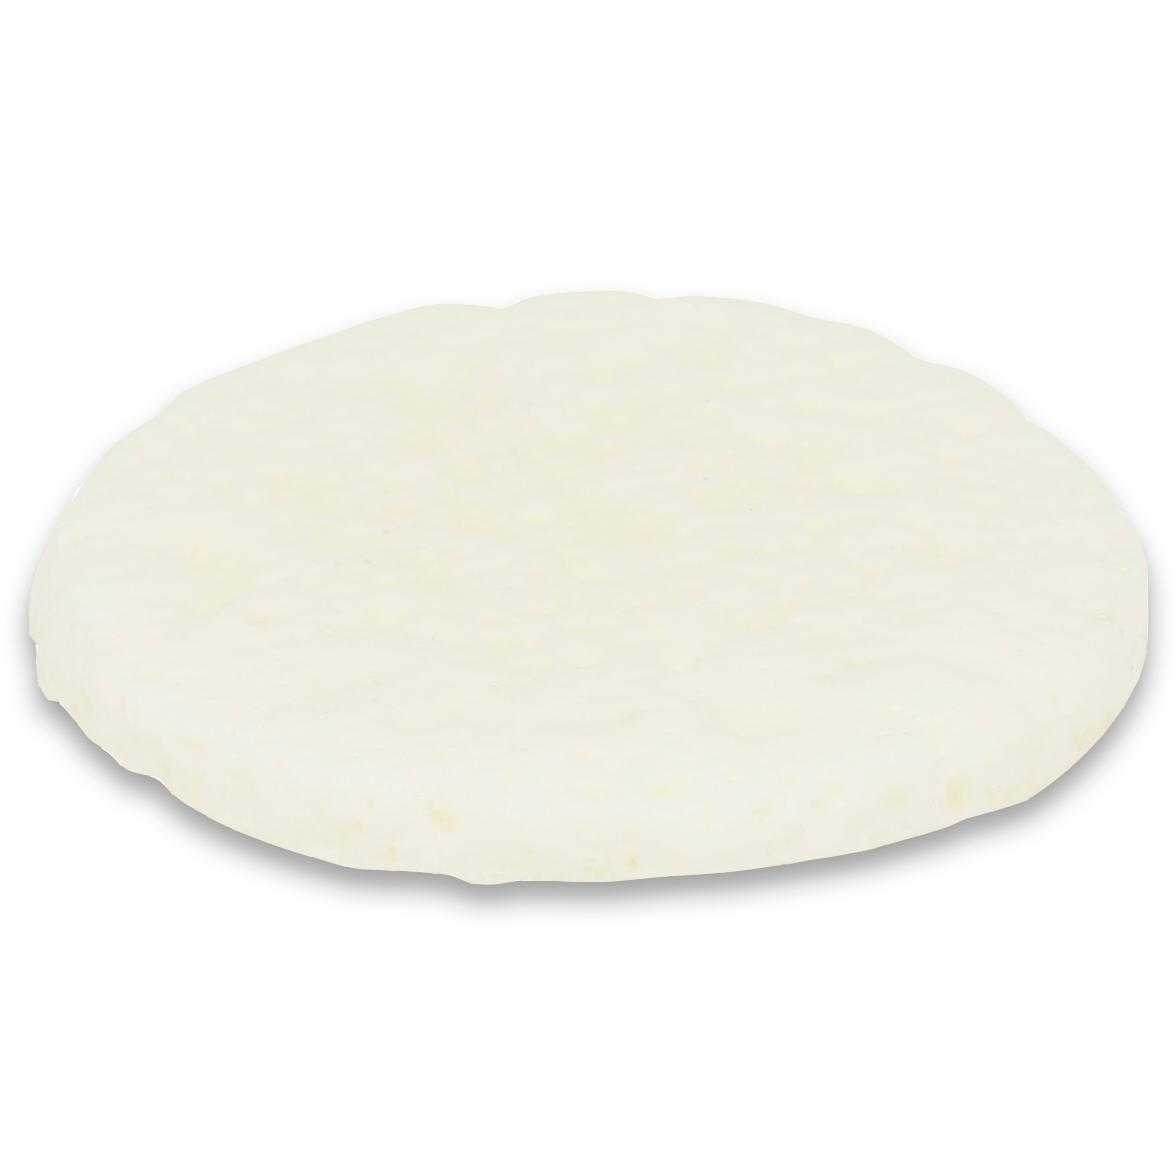 Papetti’s® Fully-Cooked 3.5” Puffed Round Egg White Patties, 153/1.3 oz